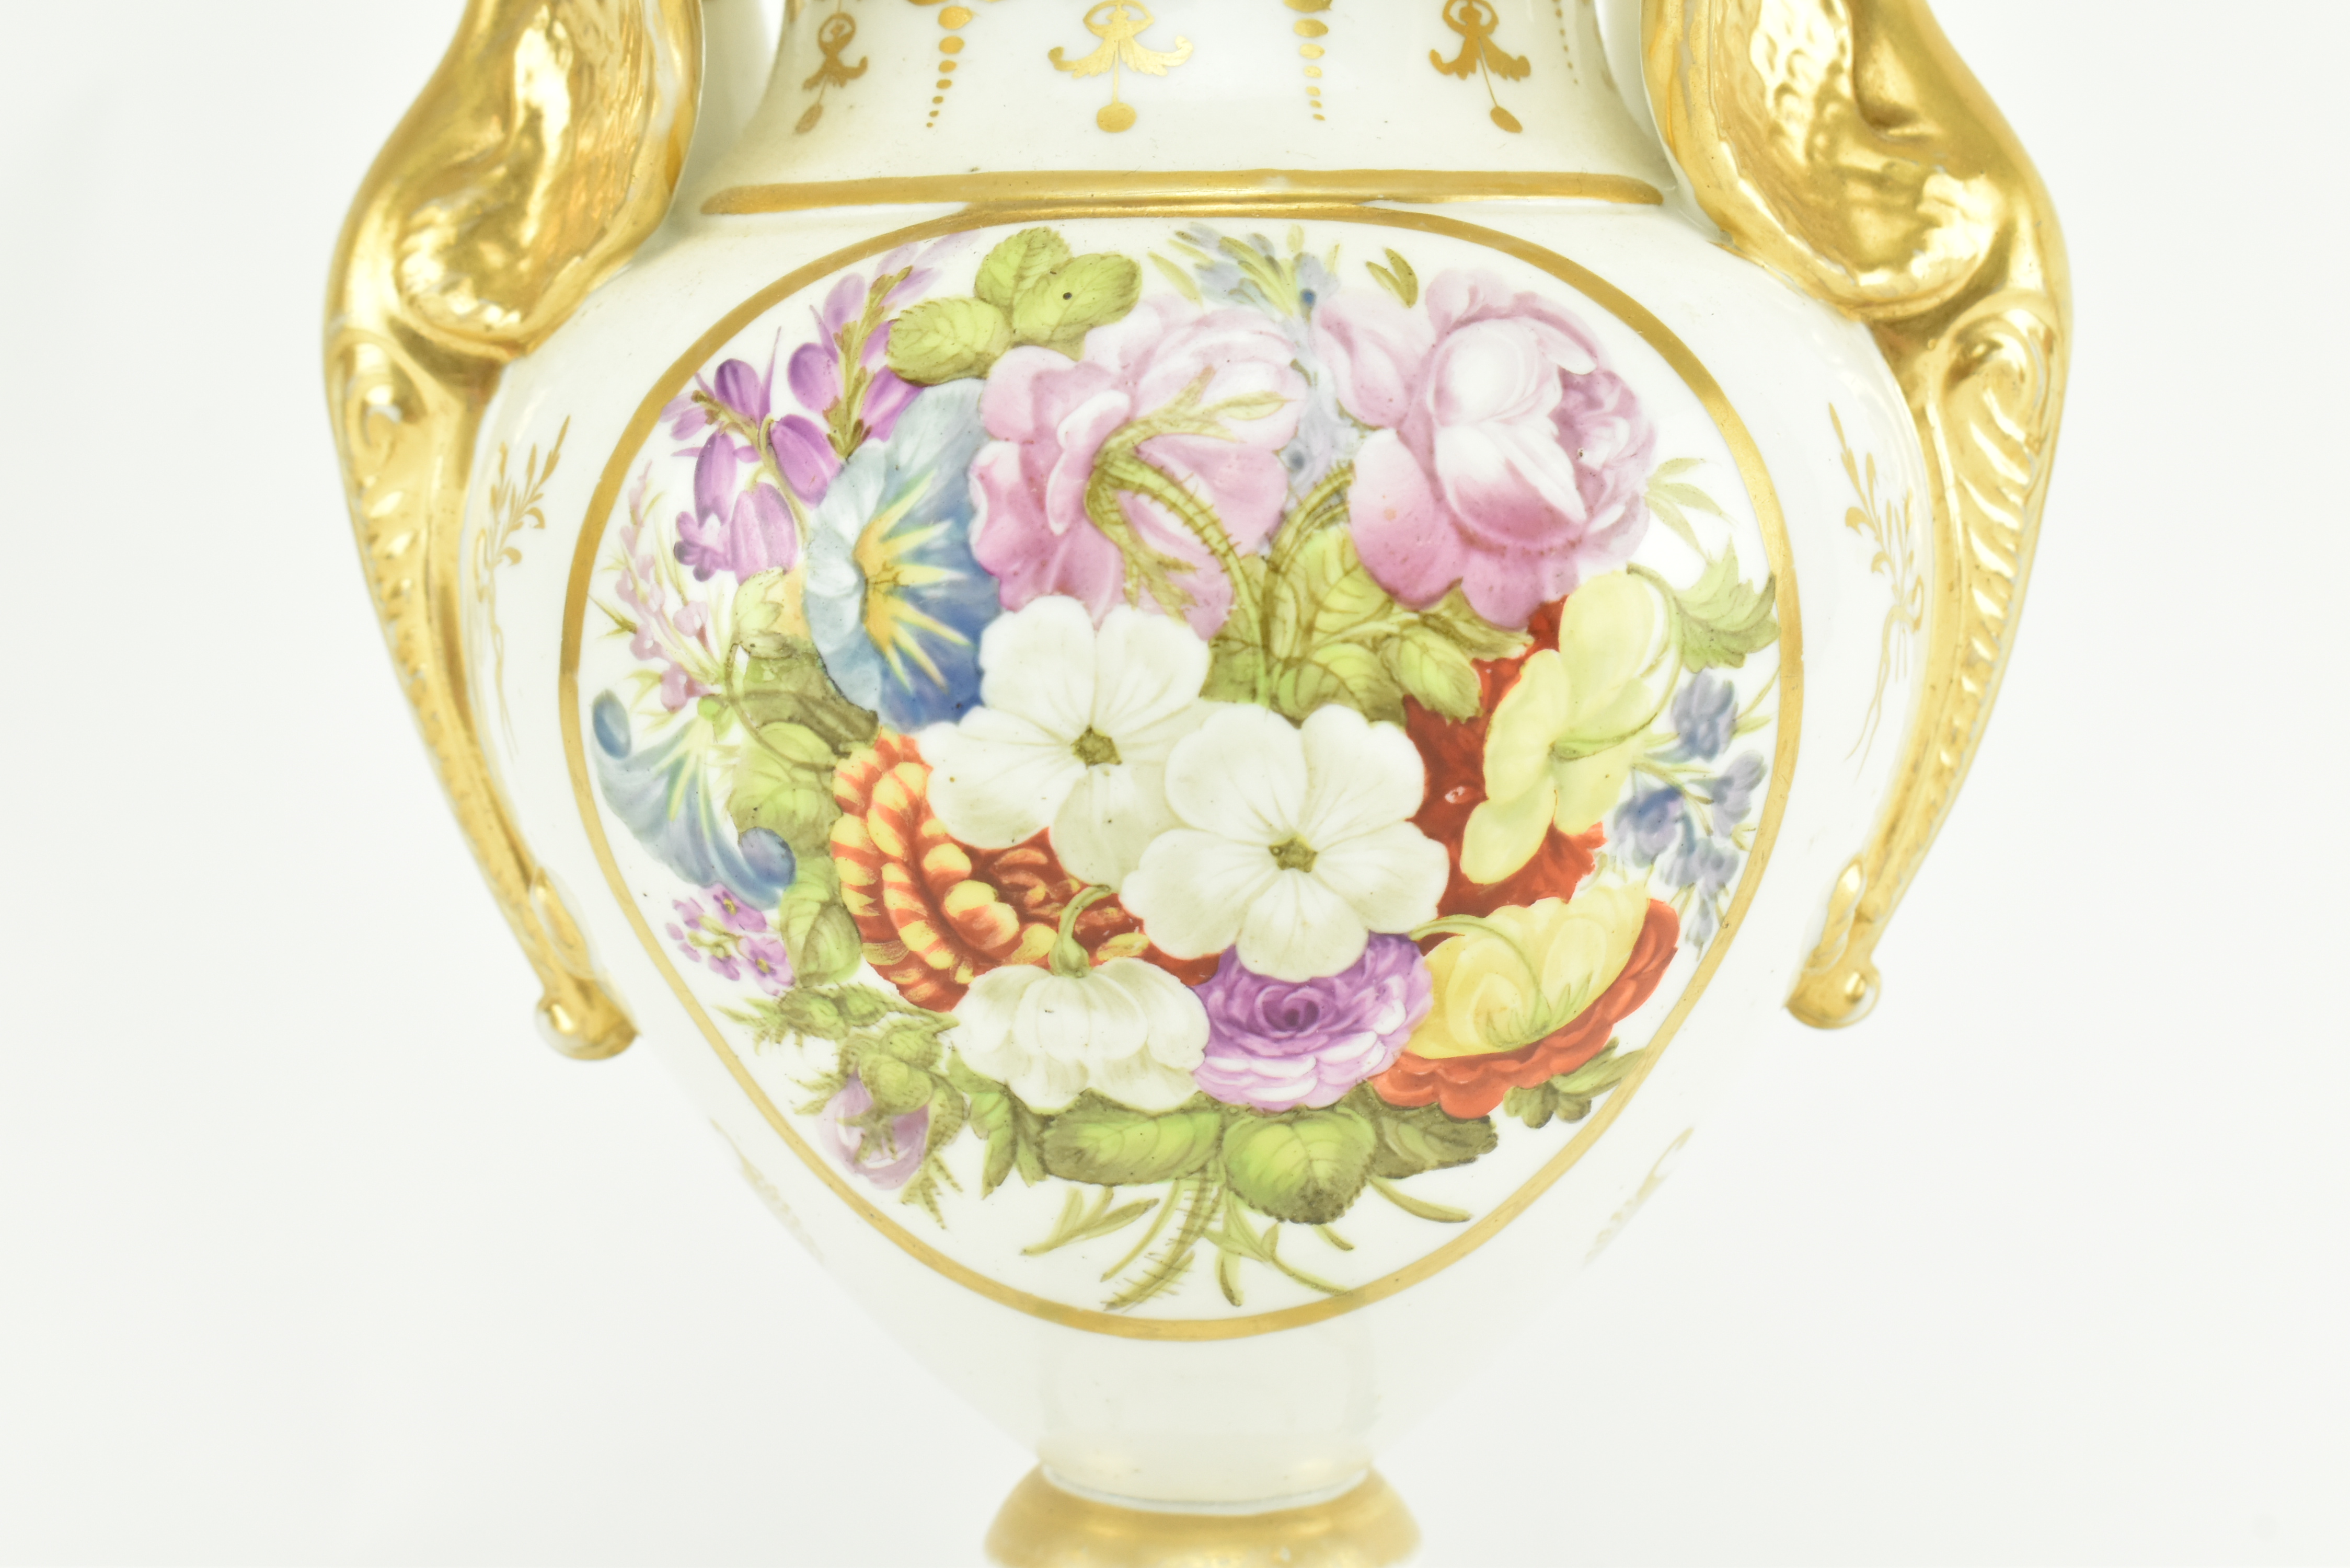 EARLY 19TH CENTURY CHAMBERLAIN'S WORCESTER URN VASE - Image 4 of 7